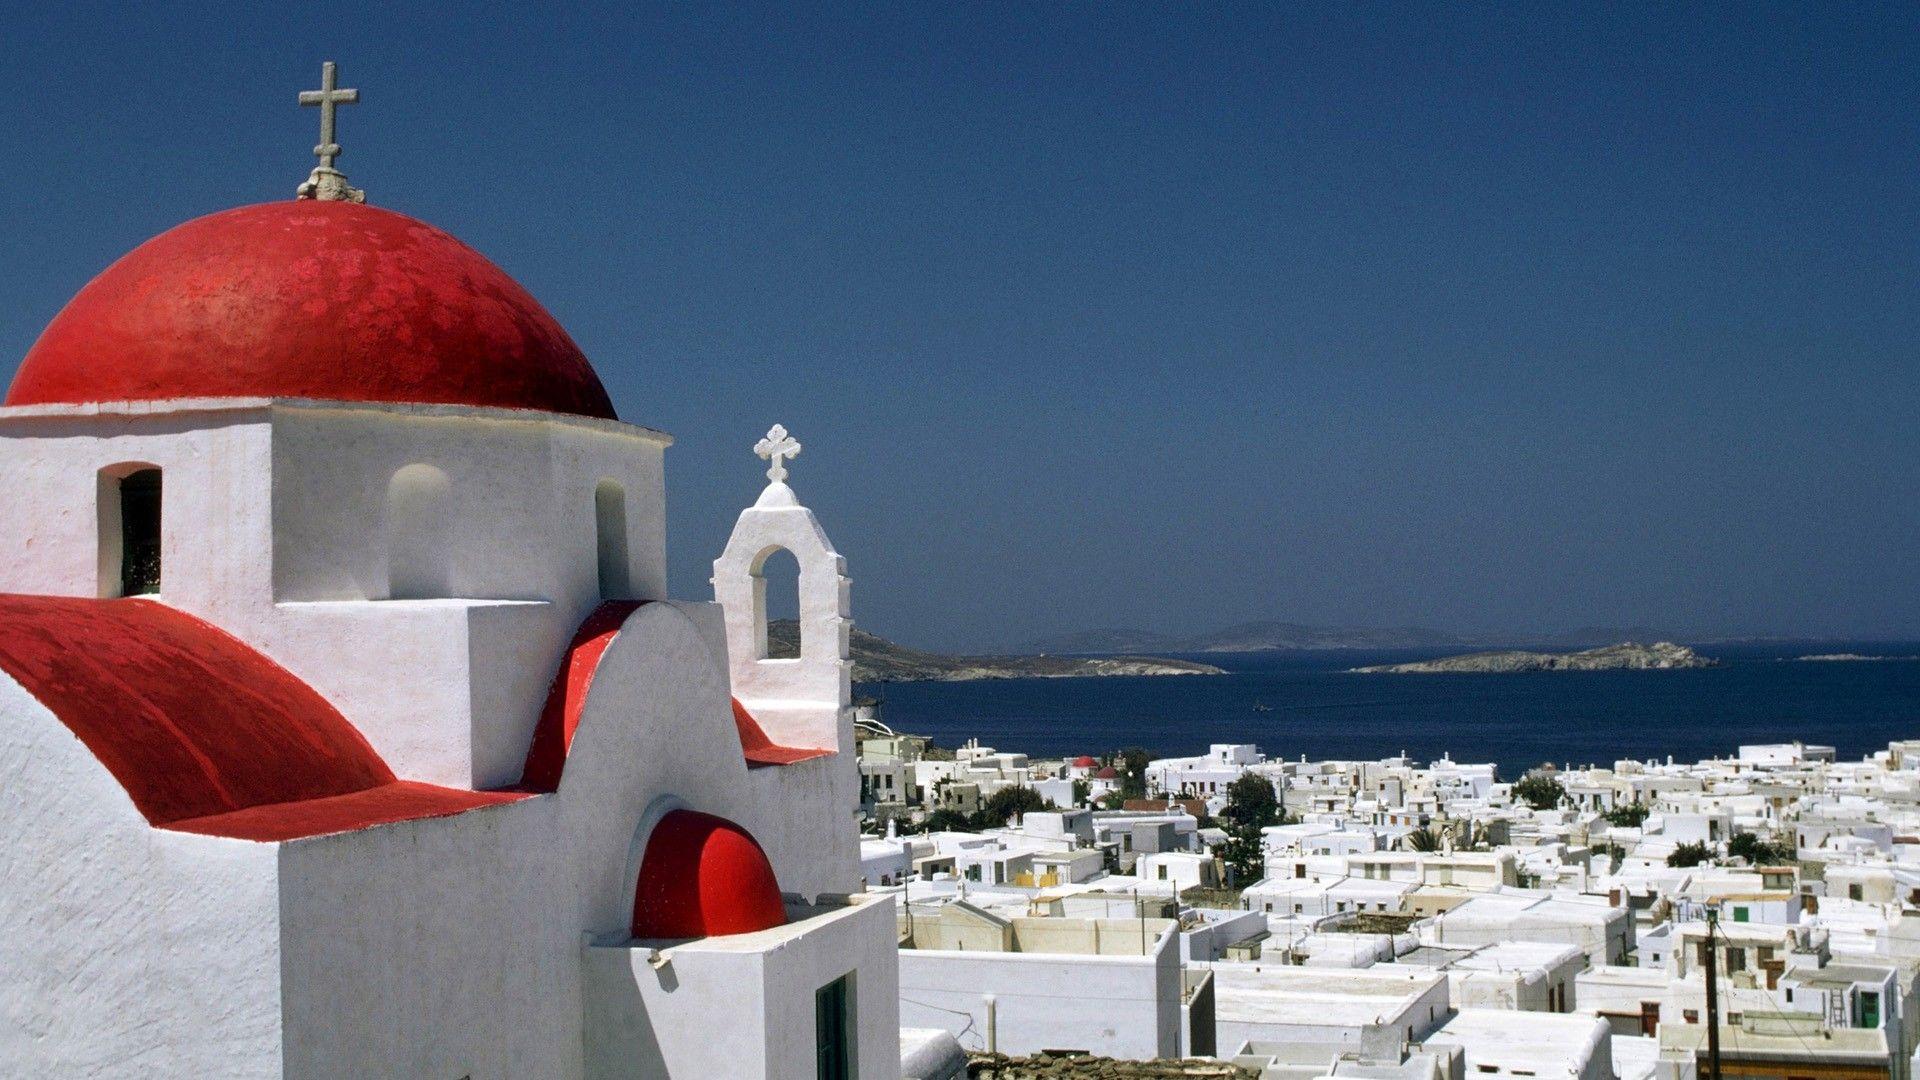 Red Domed Church, Mykonos Full HD Wallpaper. Cityscapes